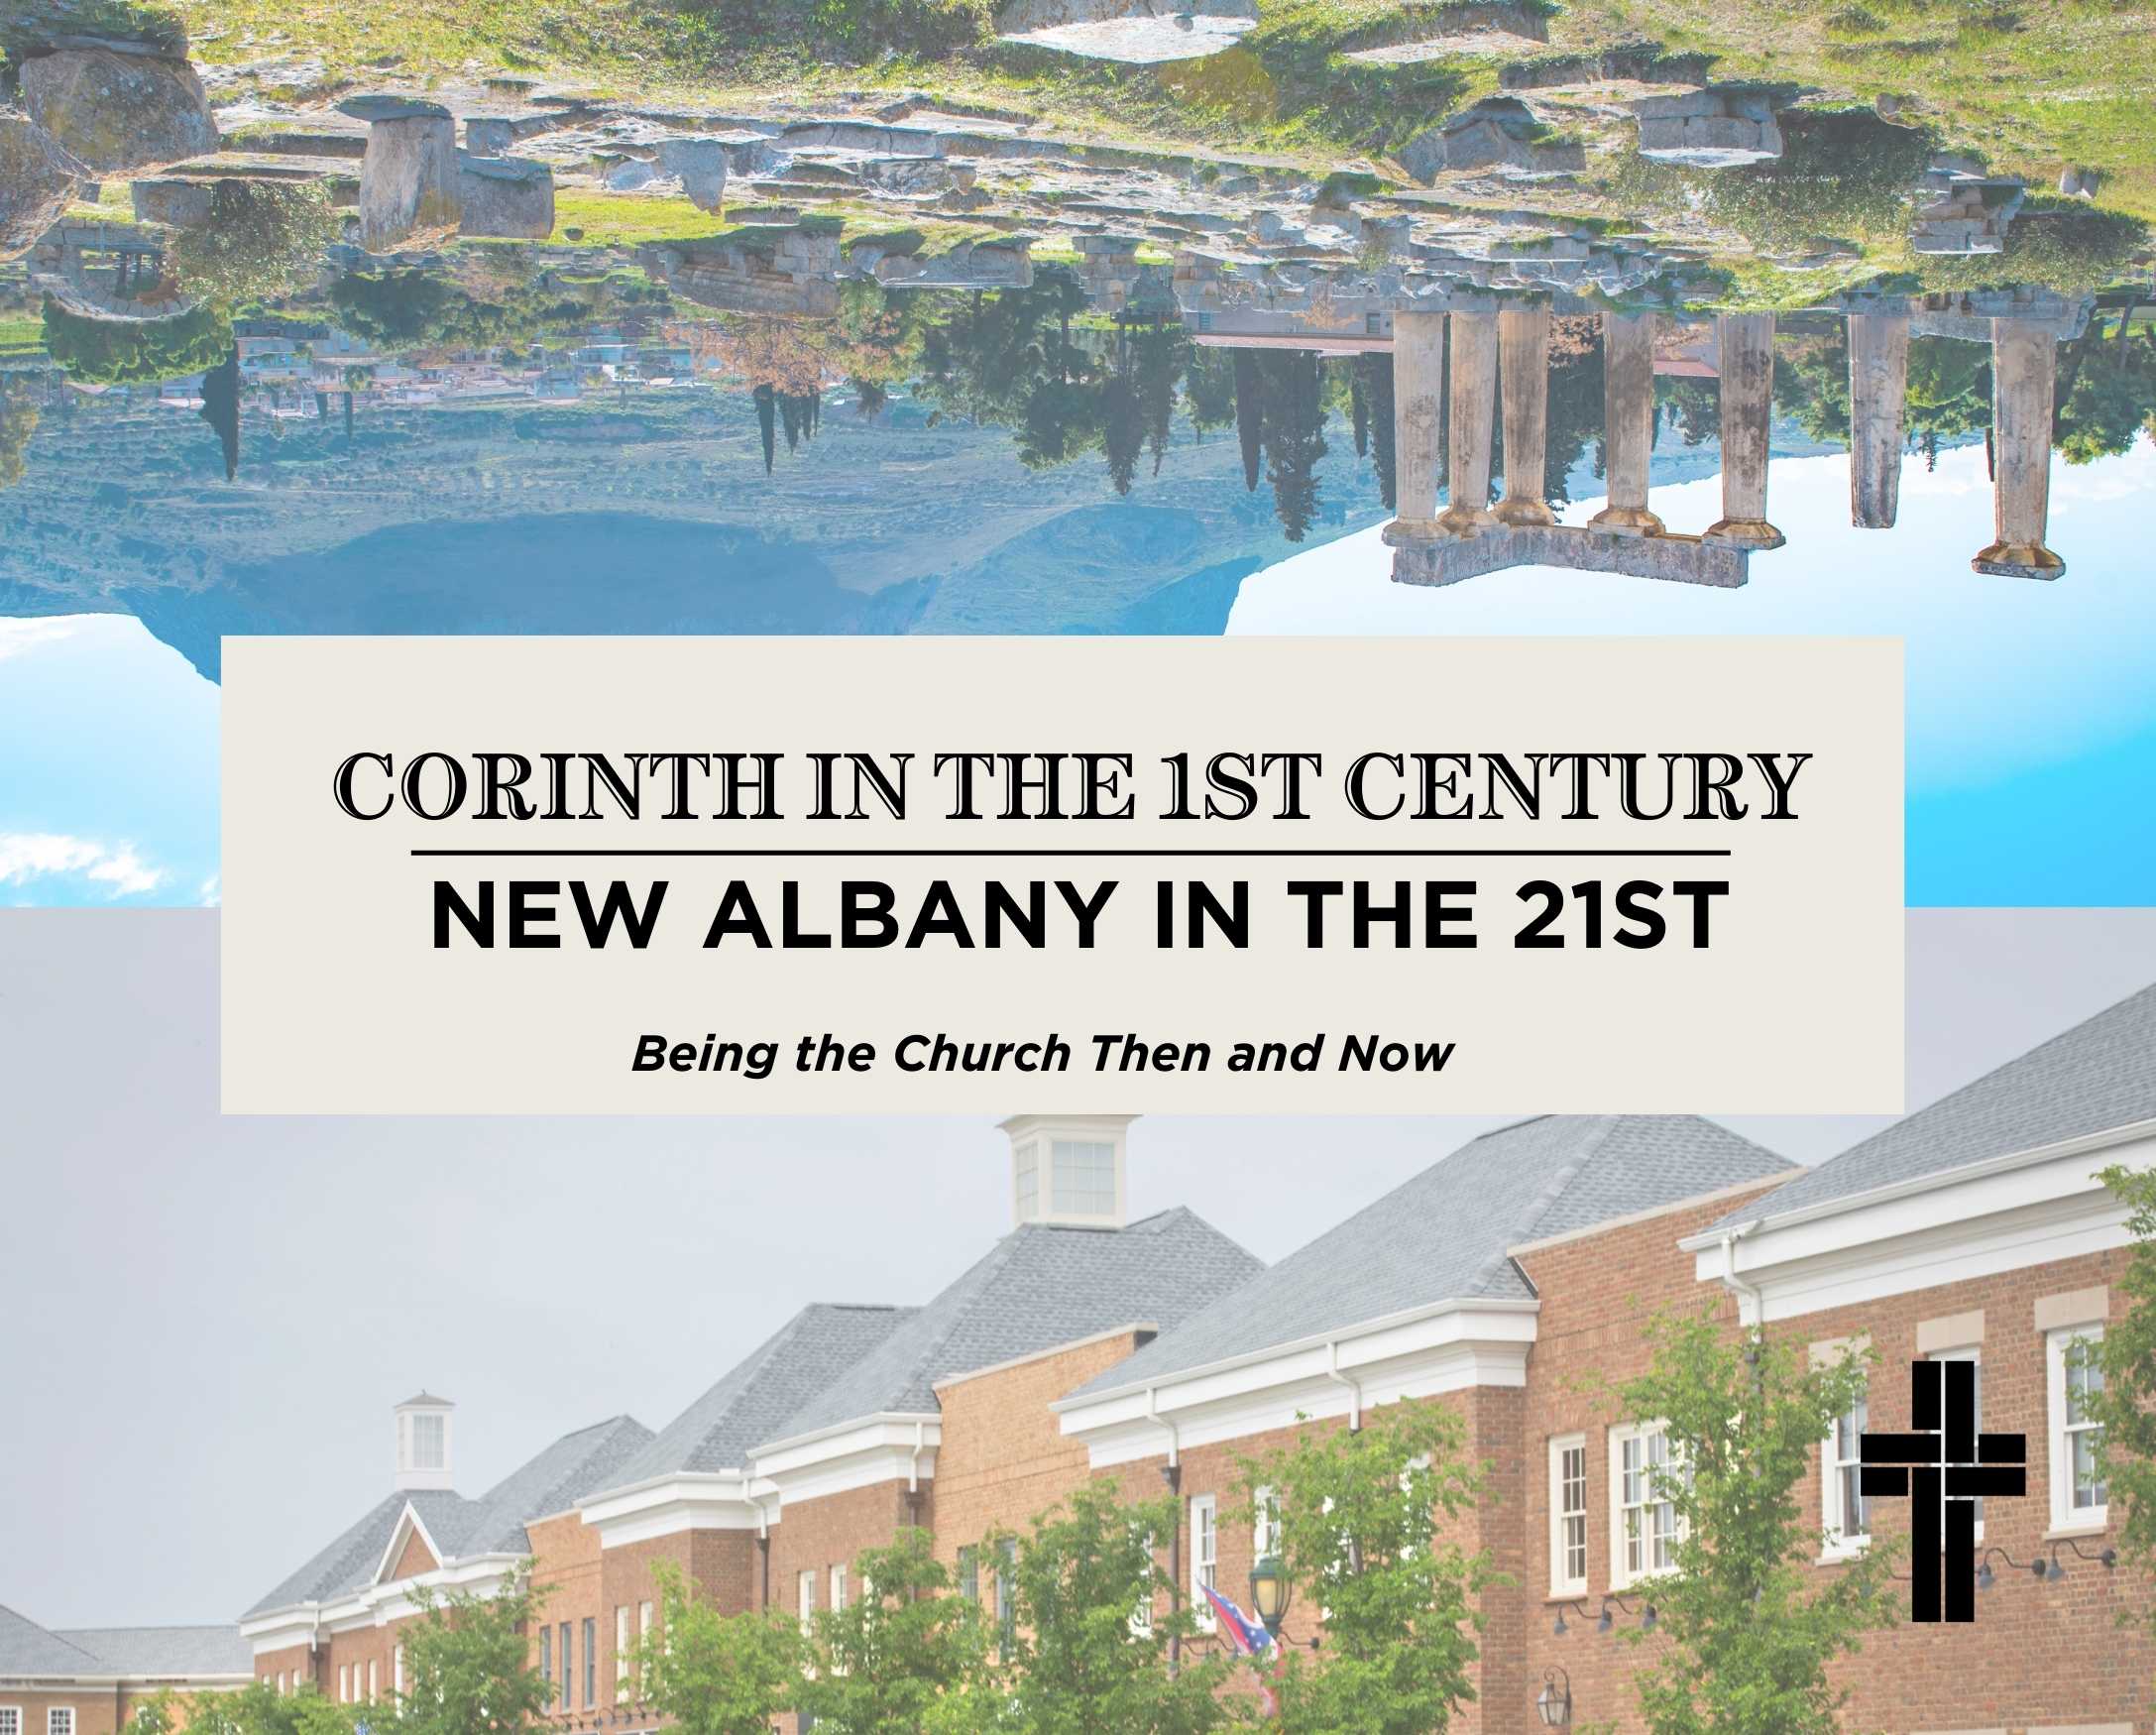 Corinth in the 1st Century, New Albany in the 21st: Many in this City